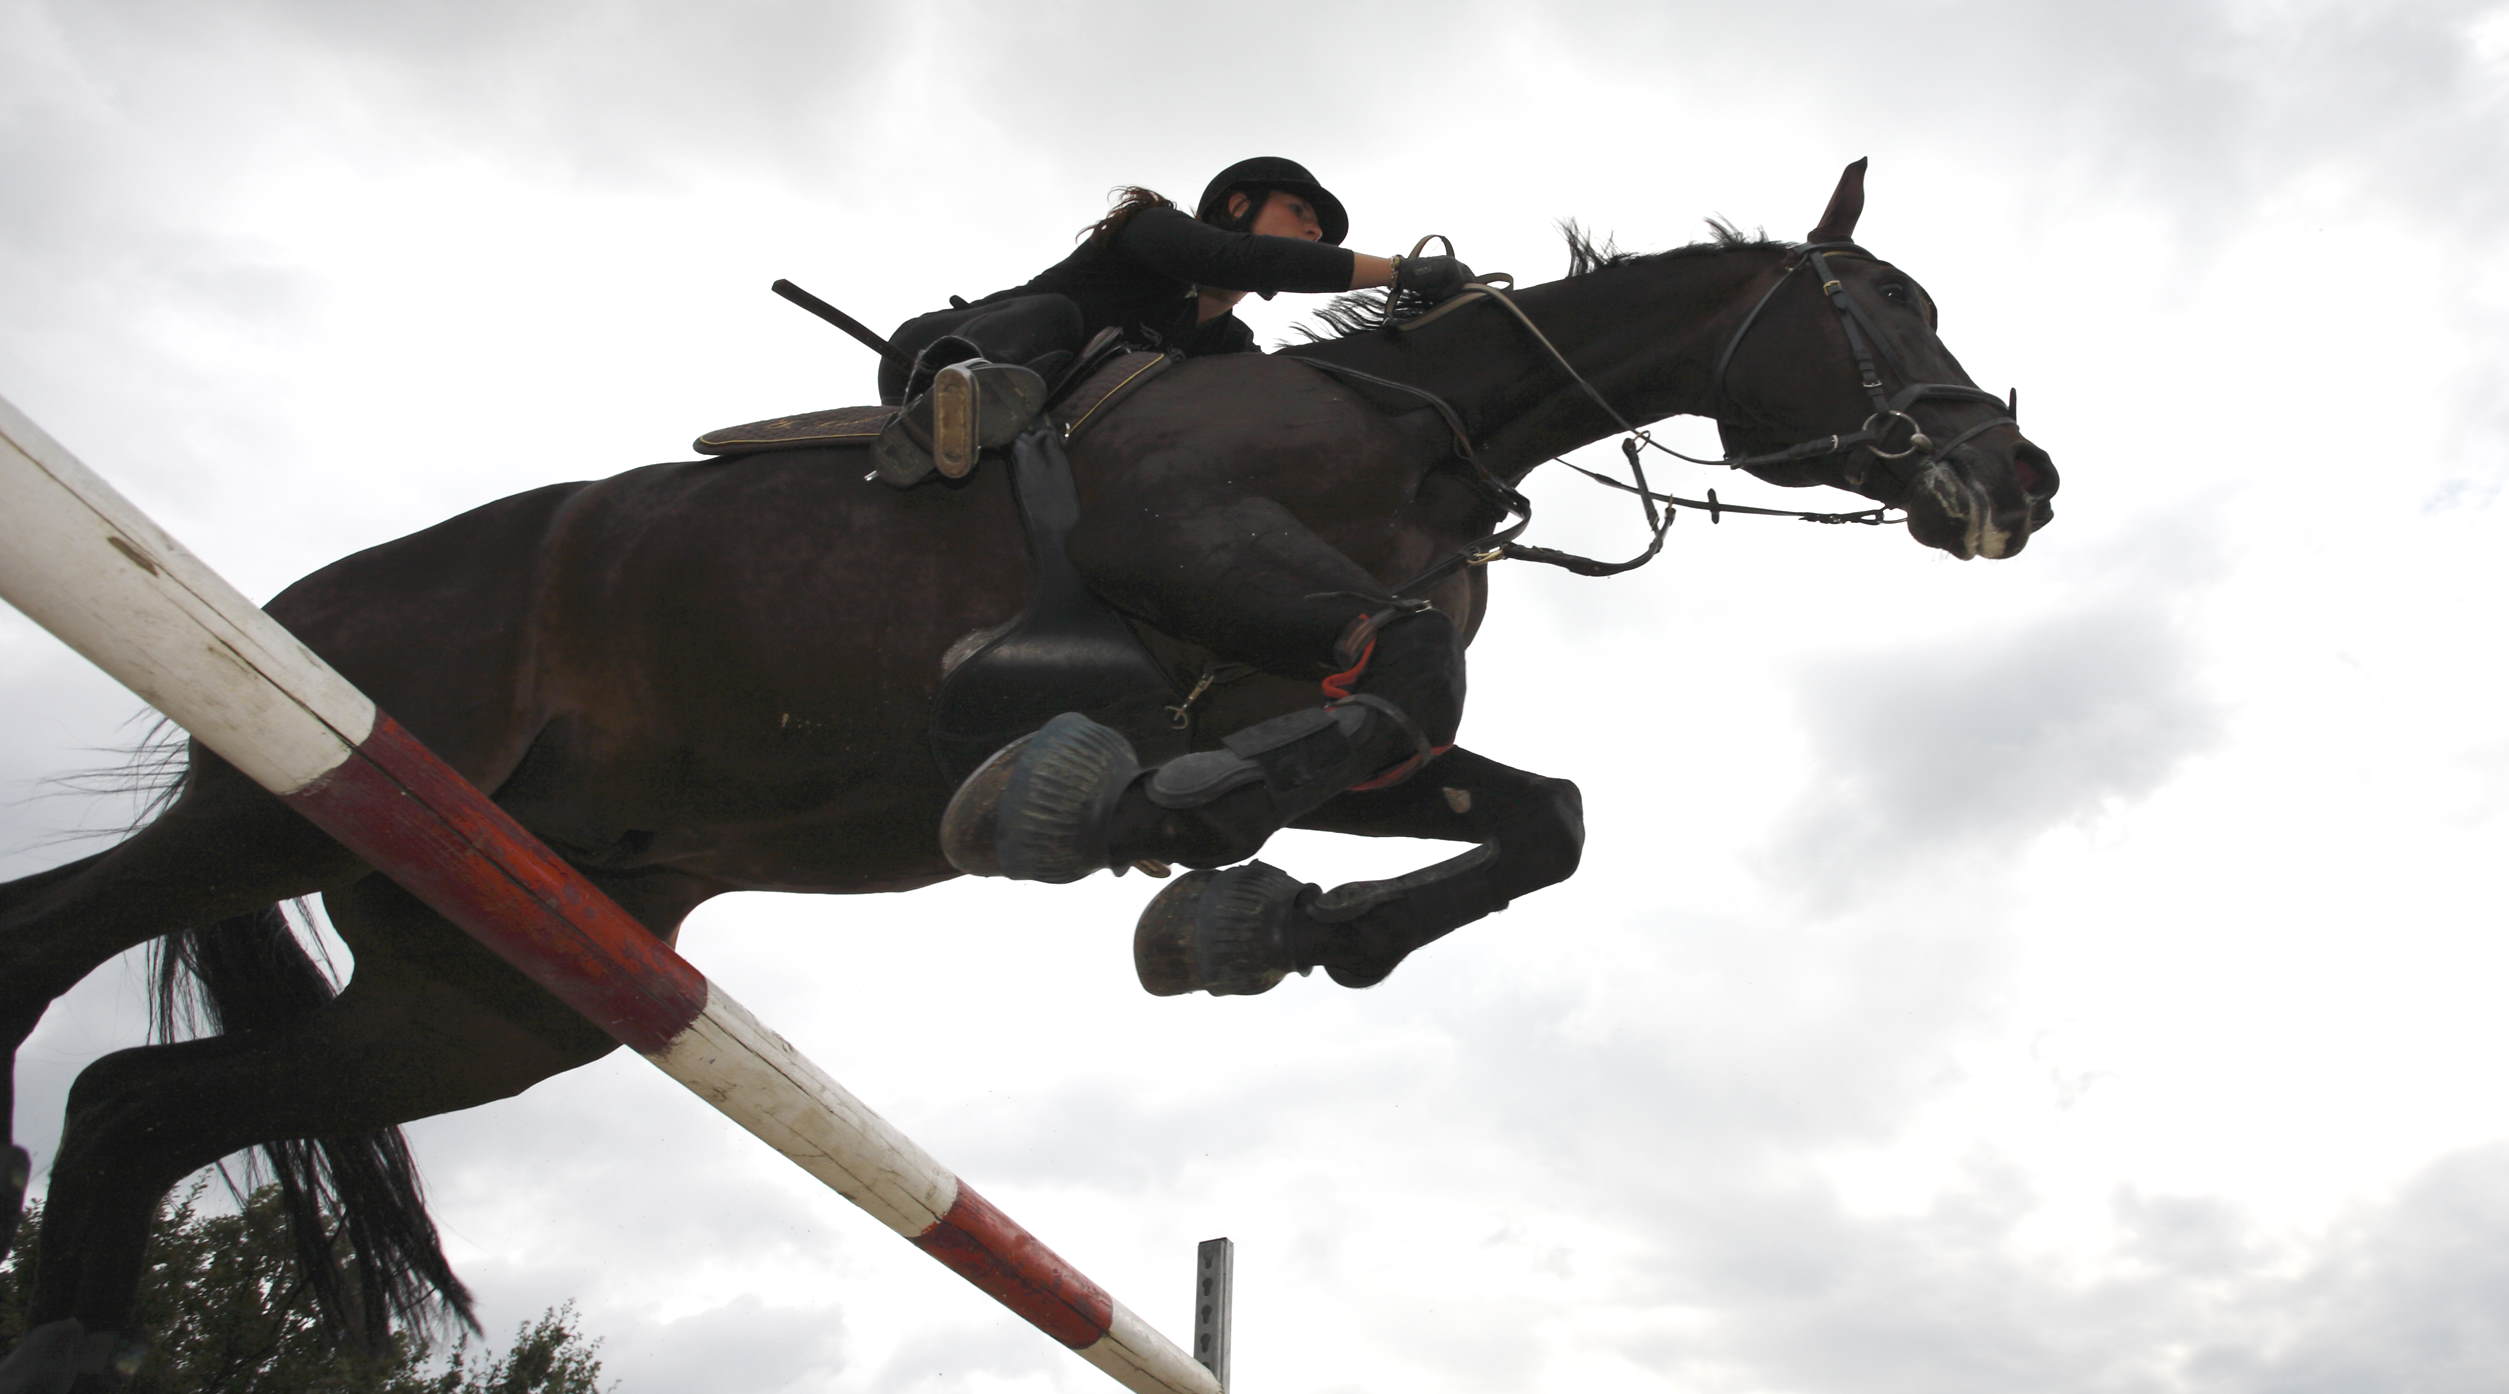 A big leap online for Harry Hall in the equestrian market